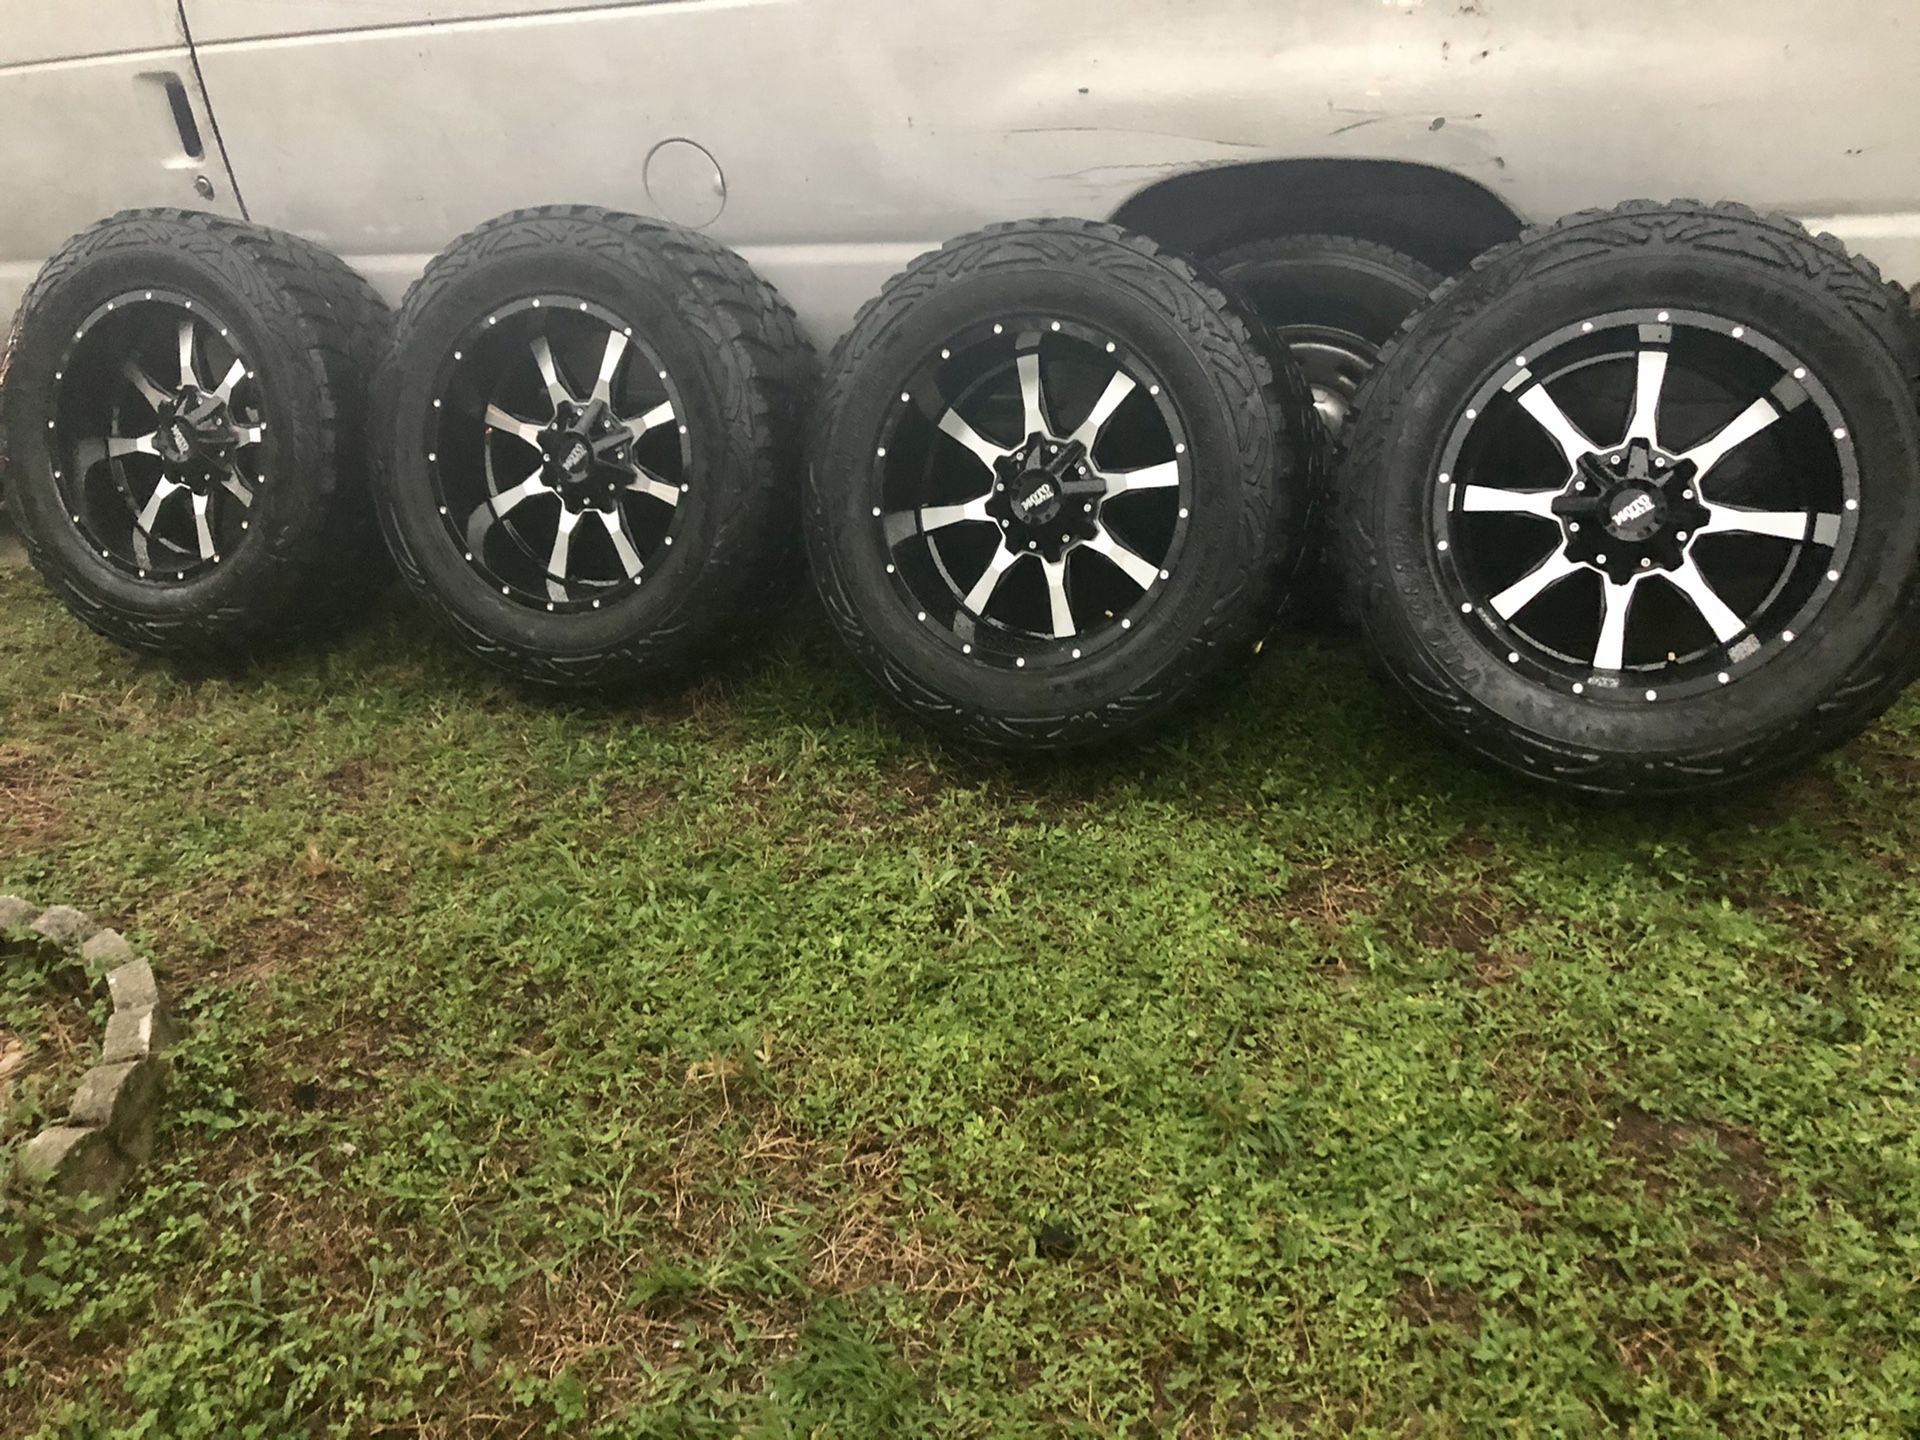 Wheels and tires new wheels 20x10 tires at 80% bolt pattern 6x139.7 for Ford F-150, Chevy and gmc 1500 , Toyota Tacoma and Dodge Ram 1500 just for 20